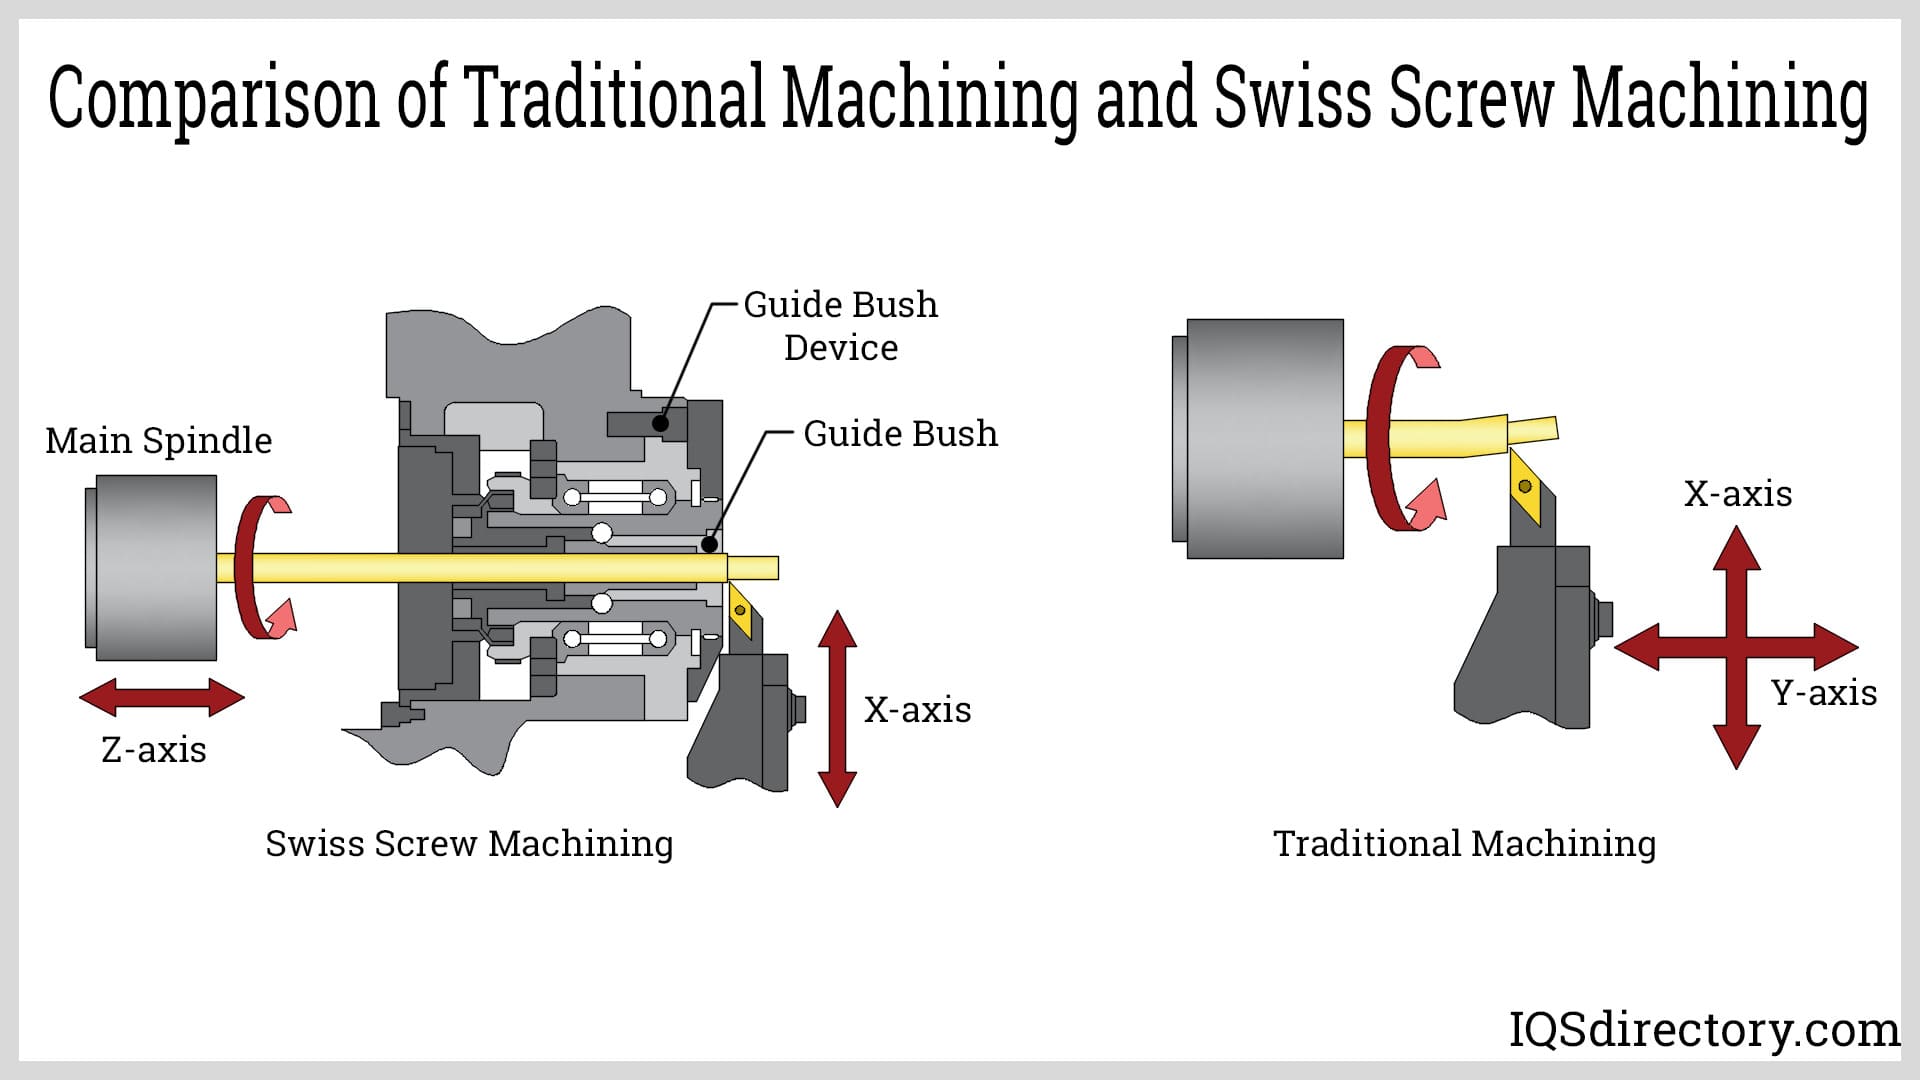 Comparison of Traditional Machining and Swiss Screw Machining